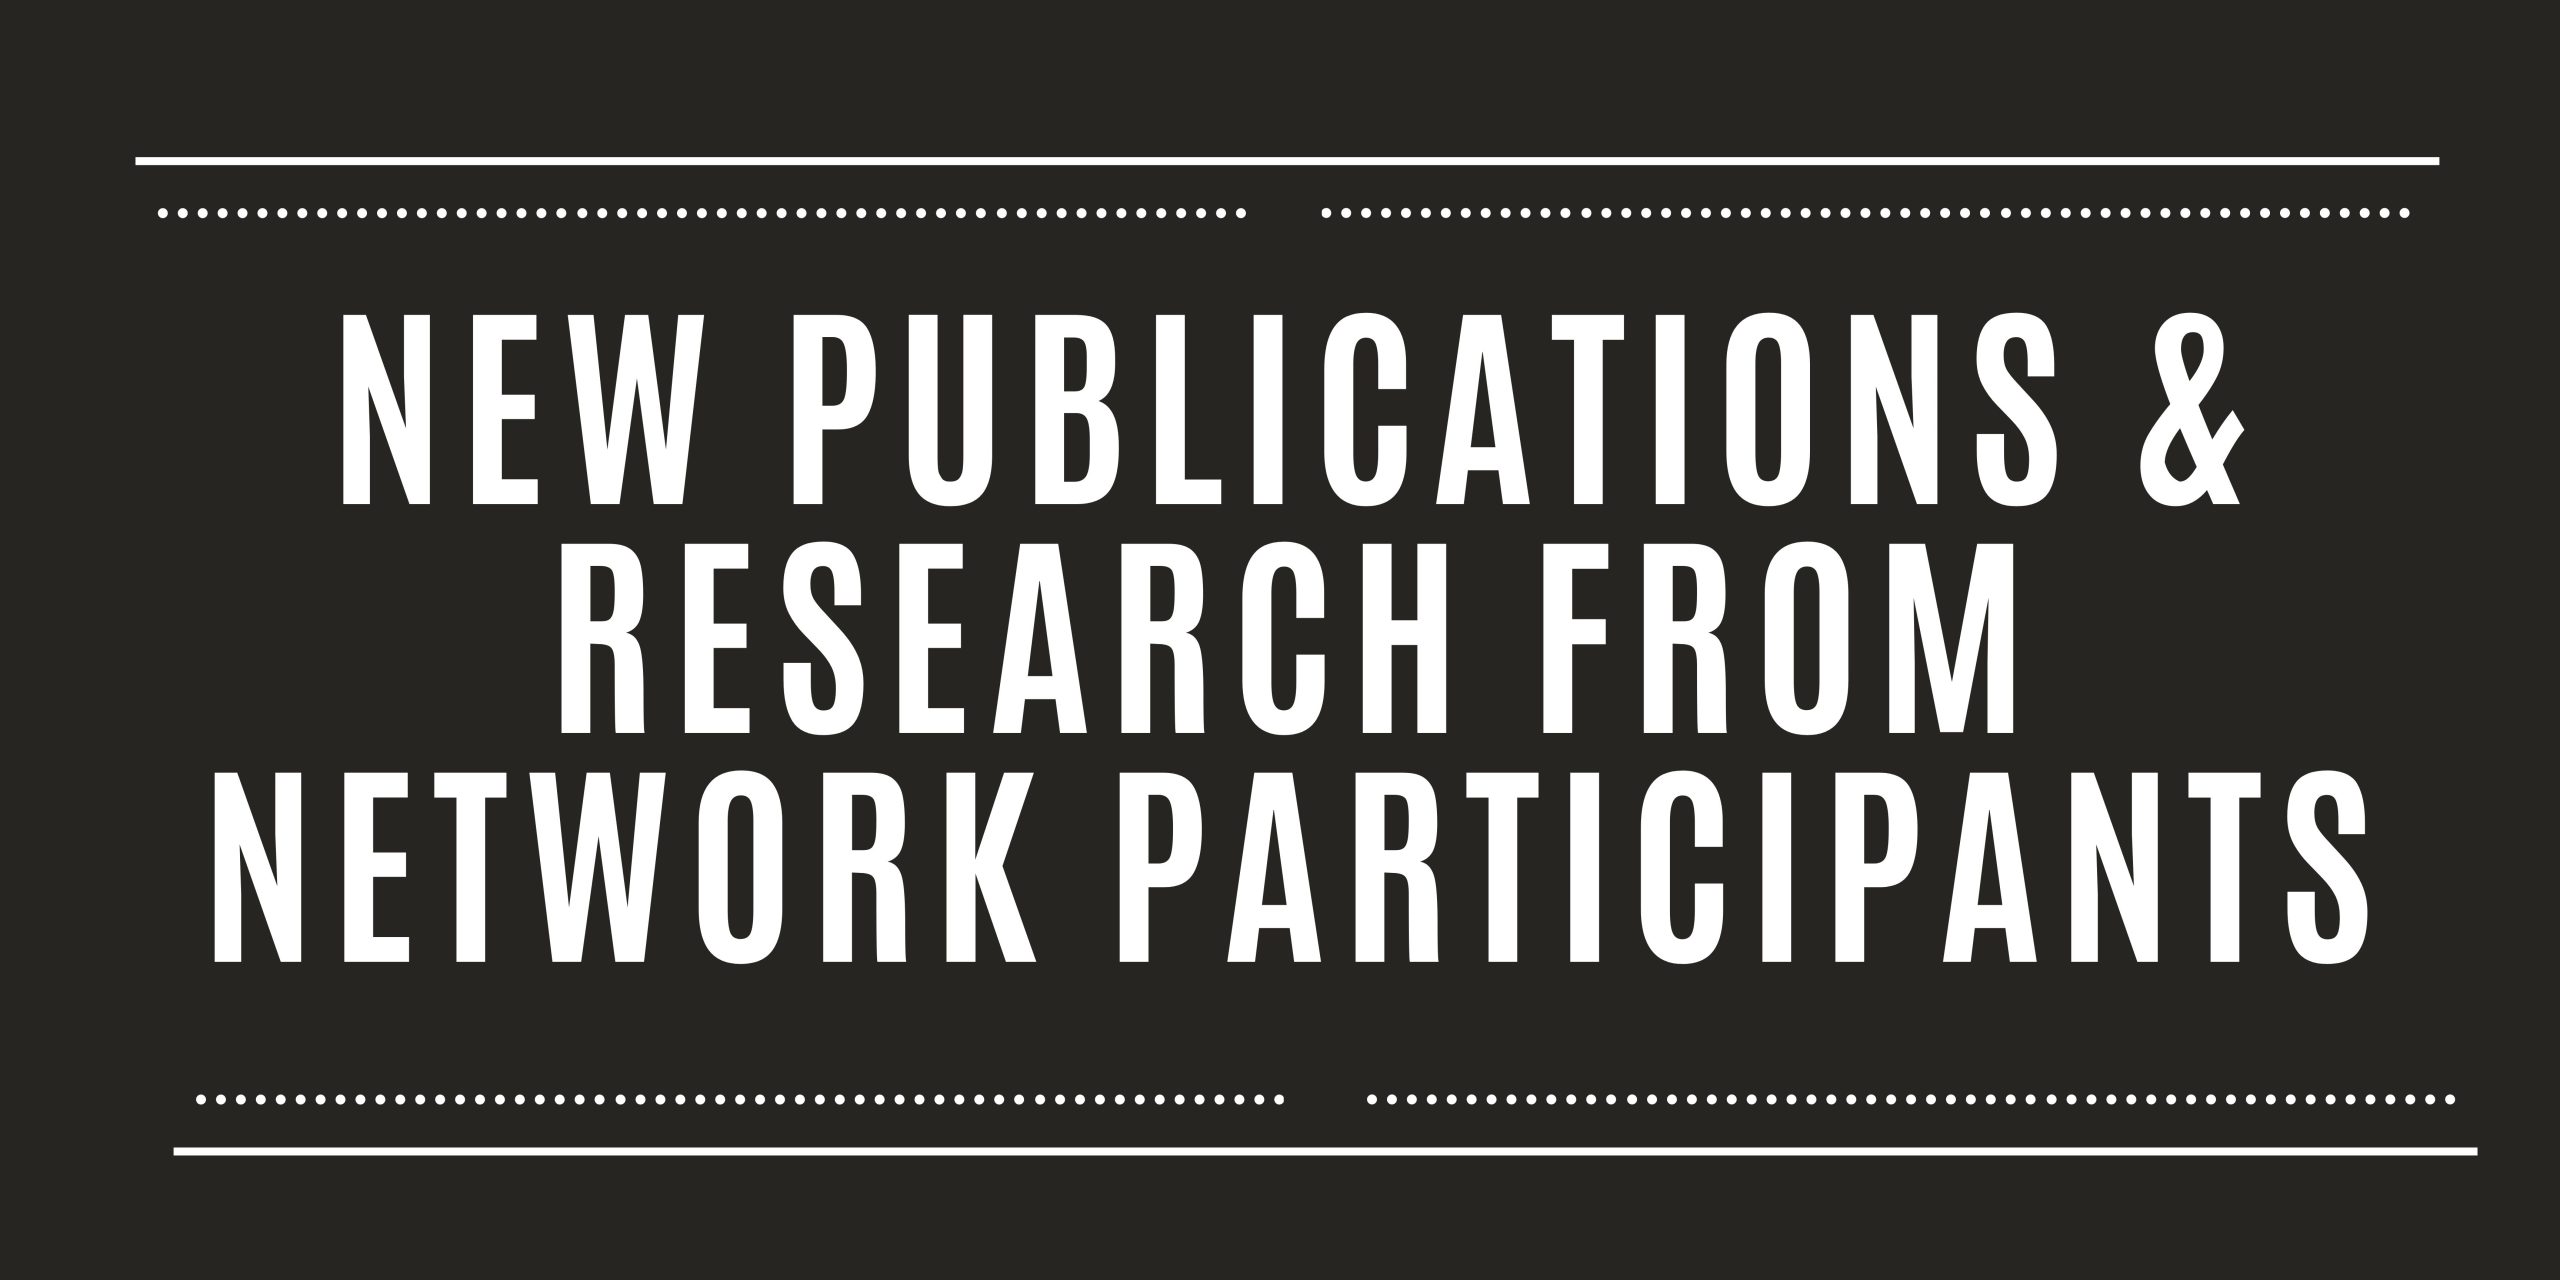 text reading new publications & research from network participants